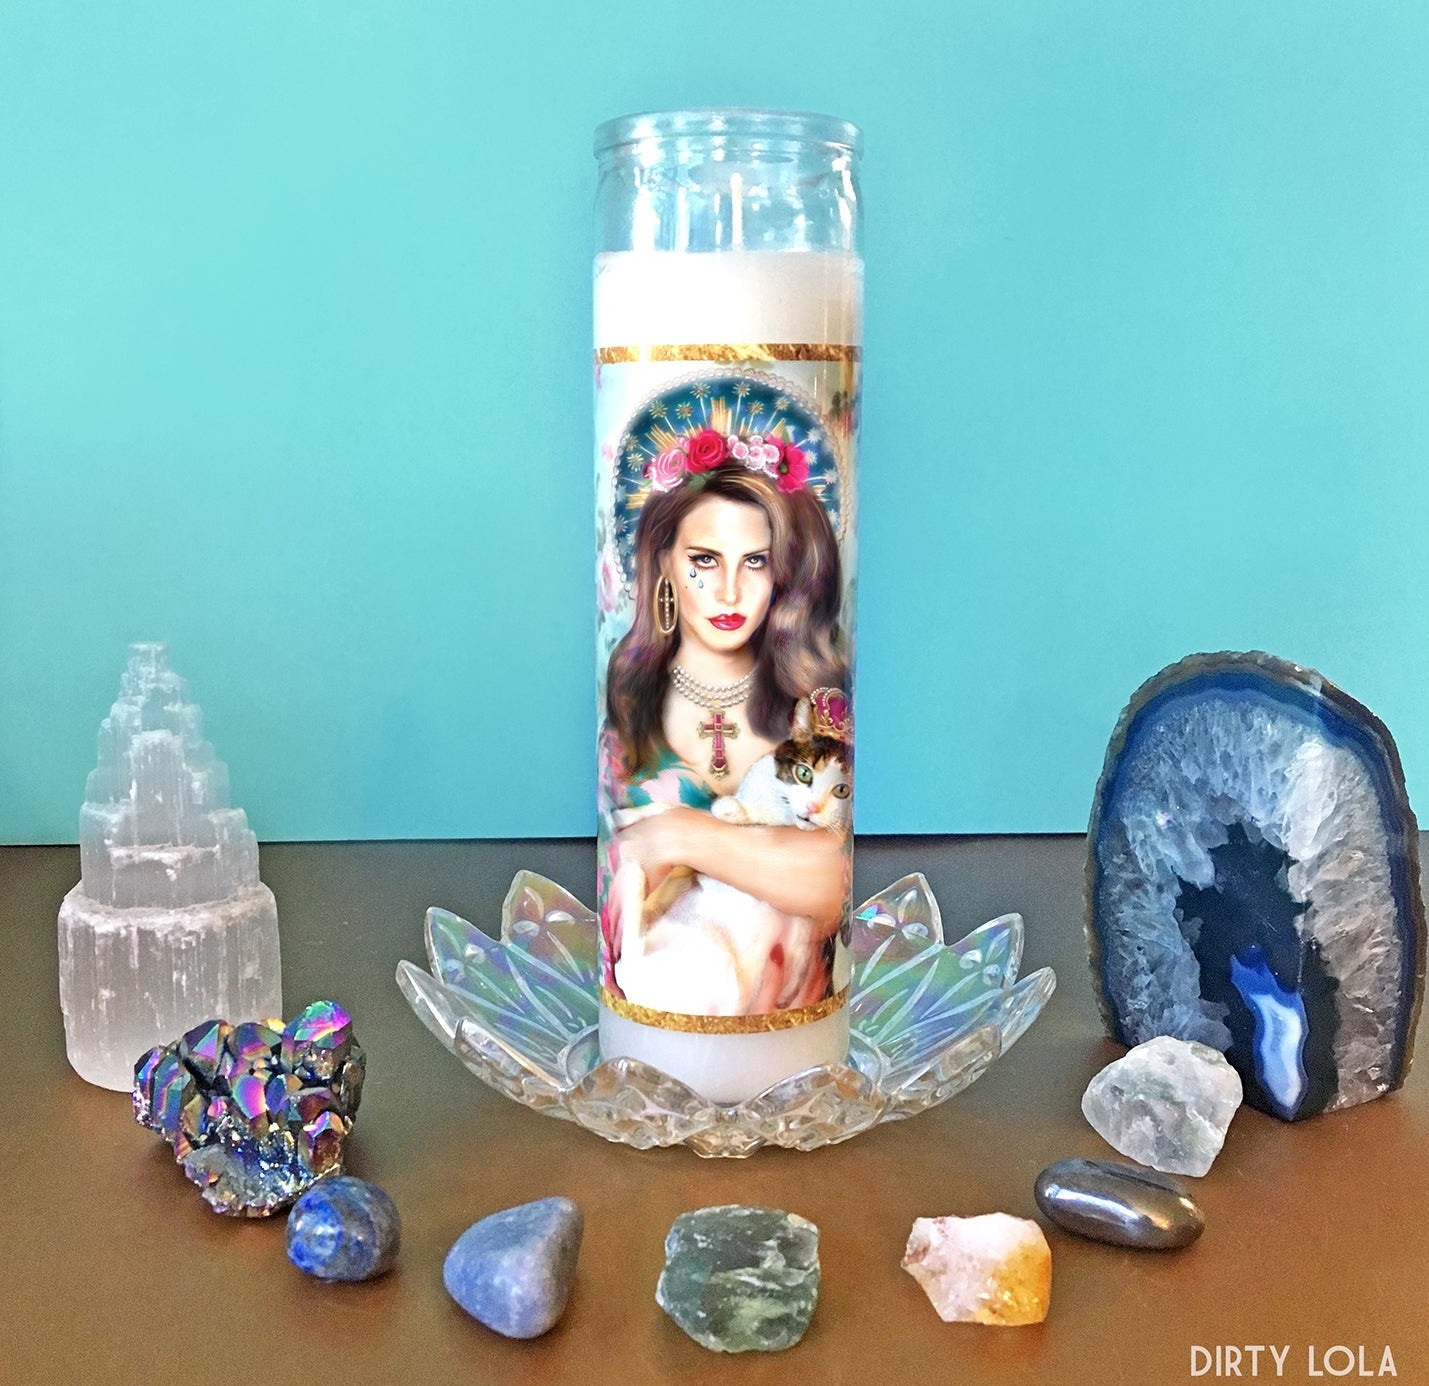 Our Lady of Del Rey